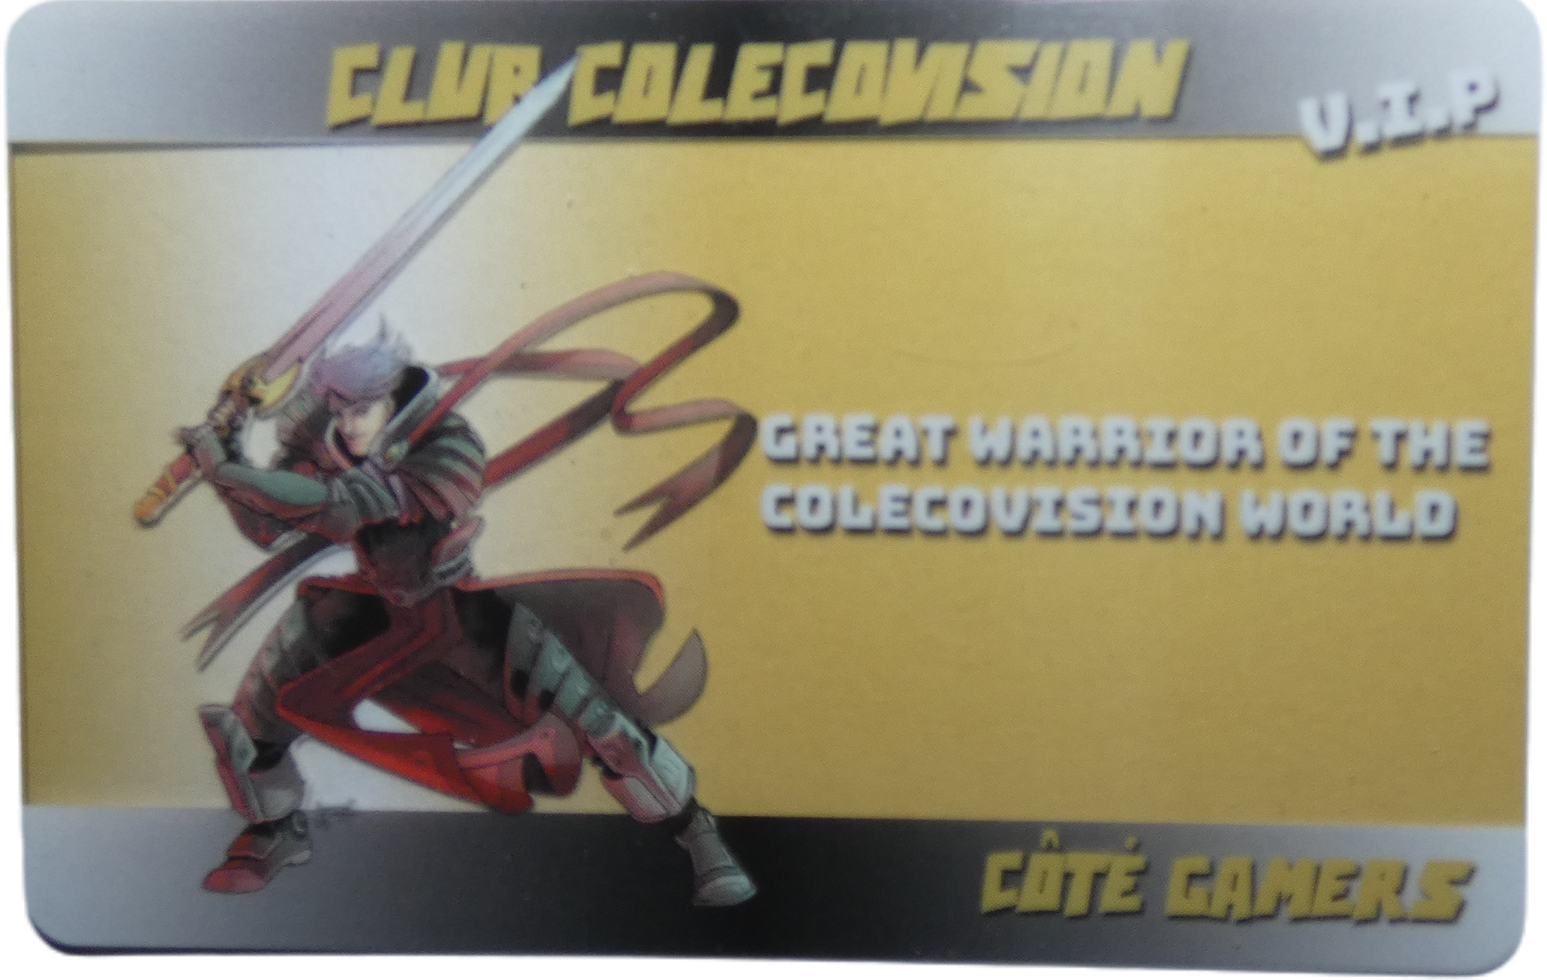 Club ColecoVision, member's card